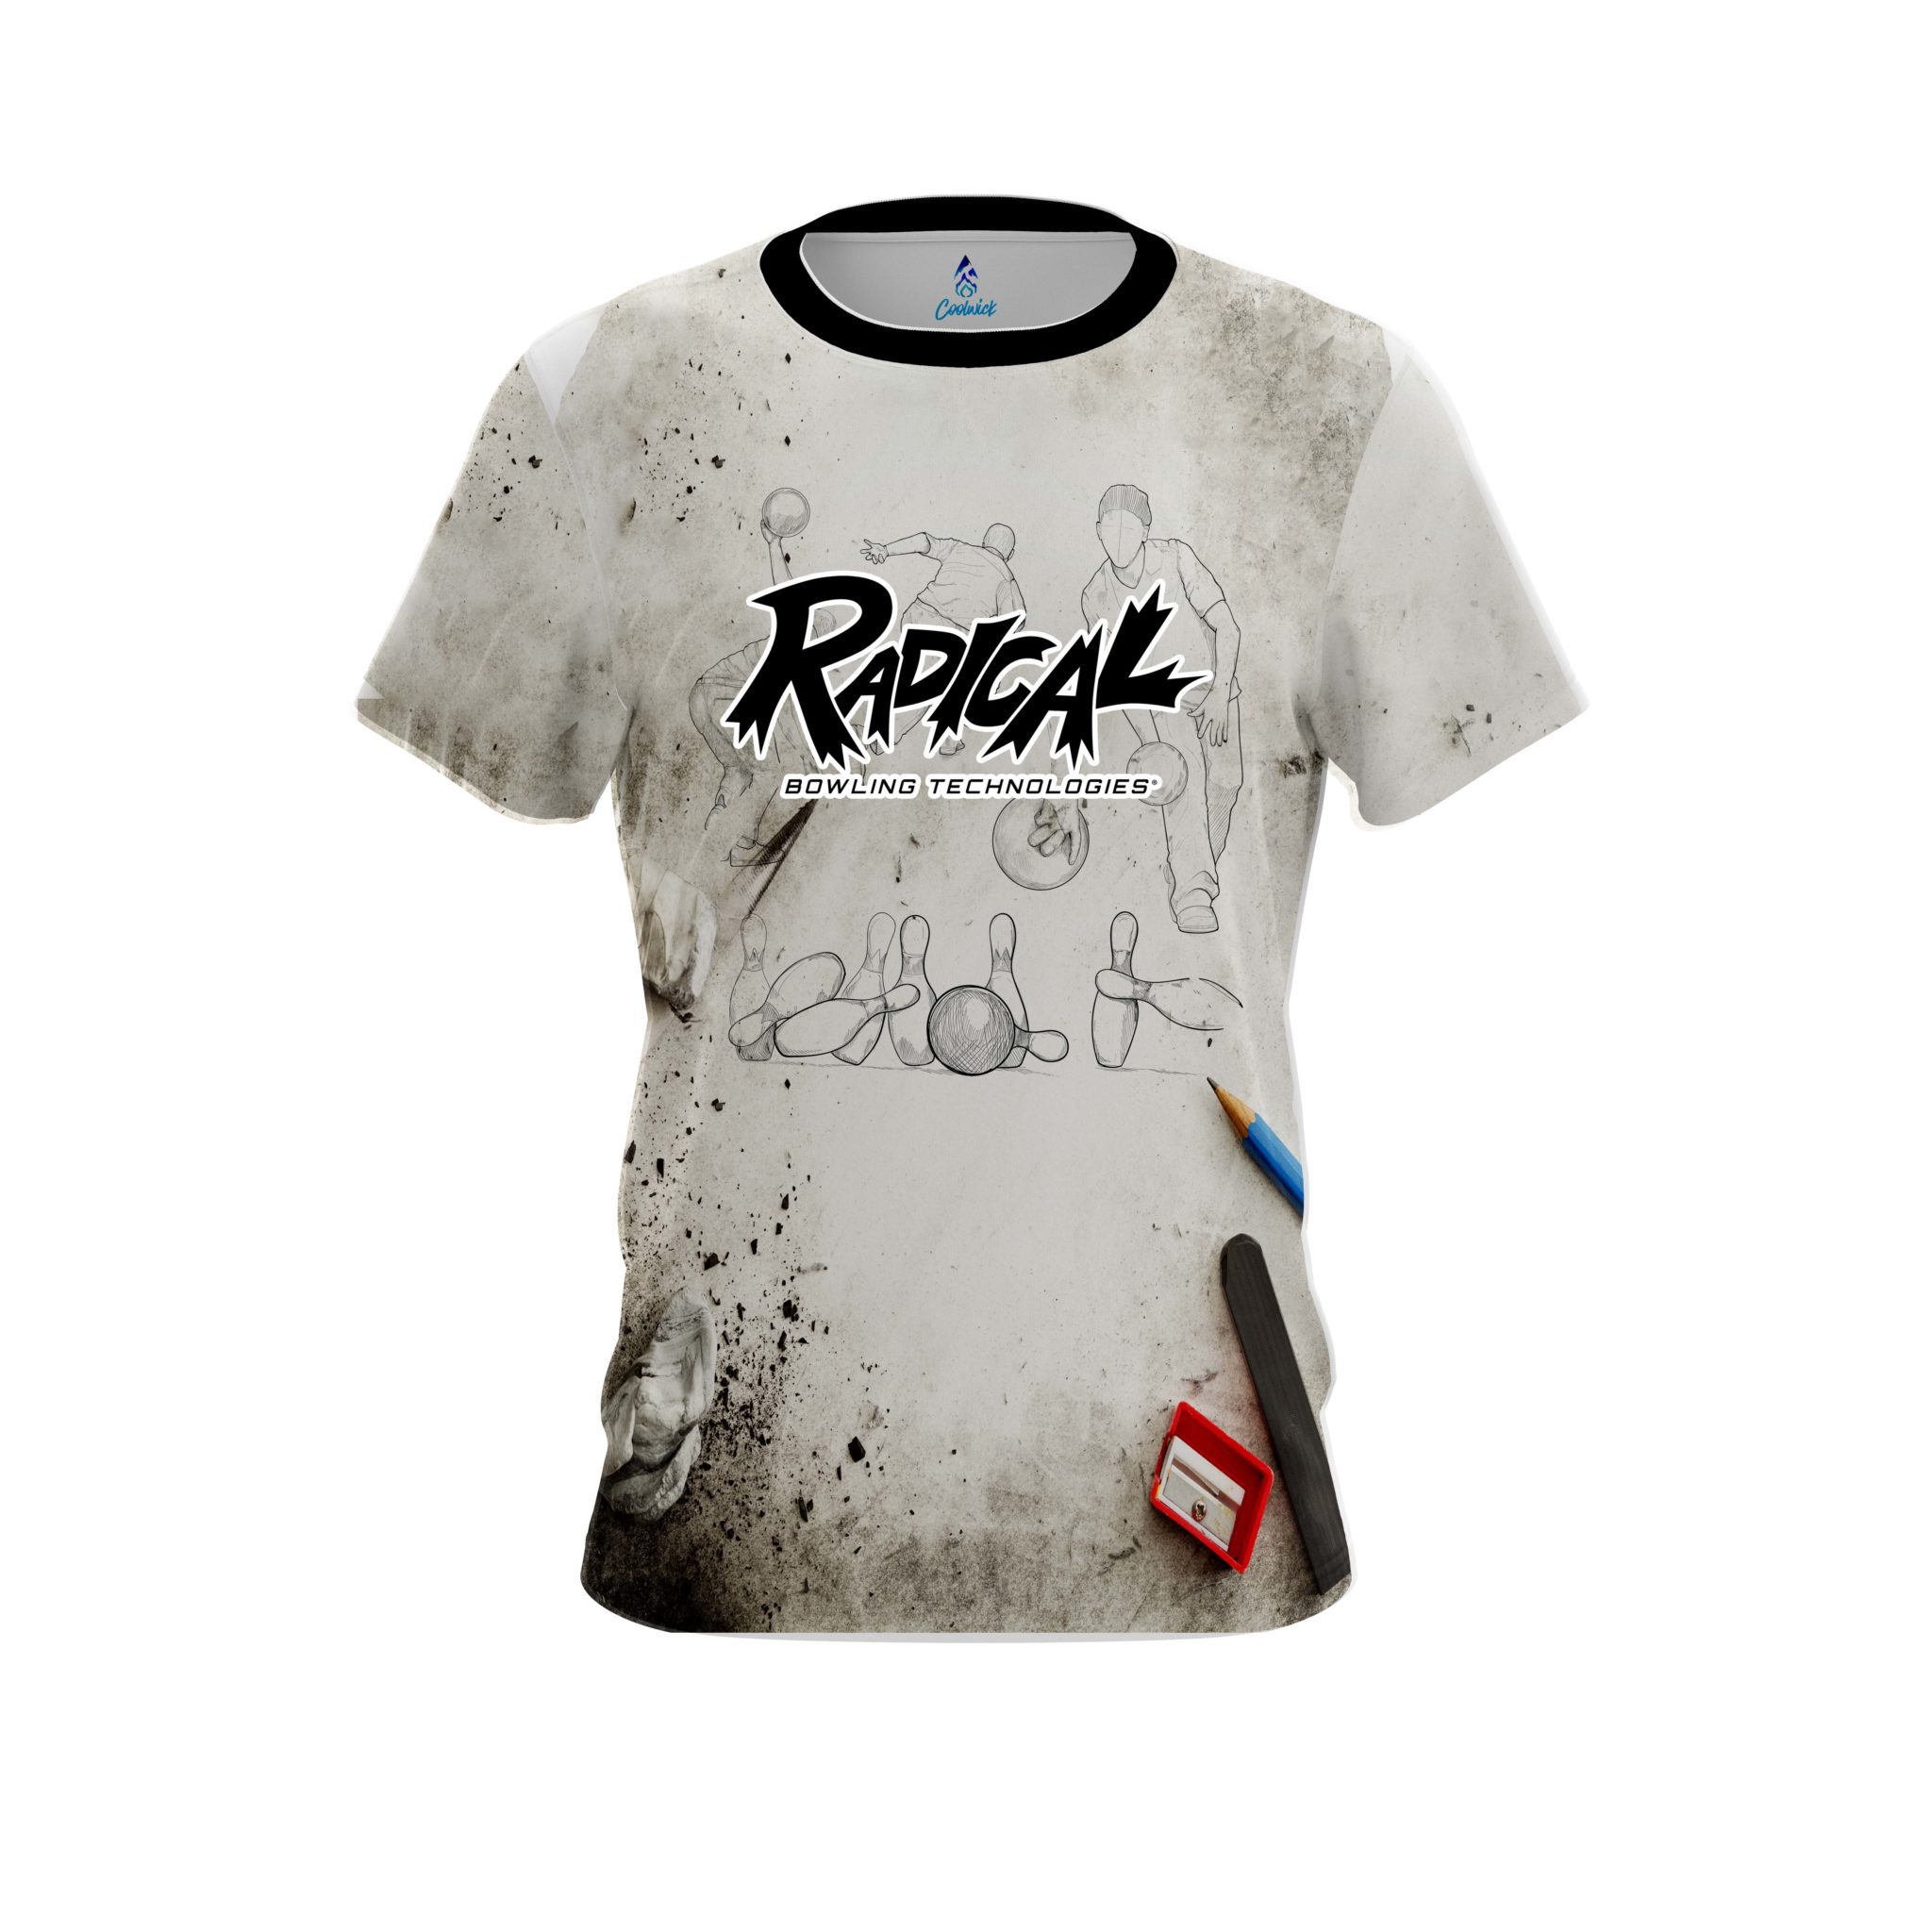 Radical Drawing Board CoolWick Bowling Jersey